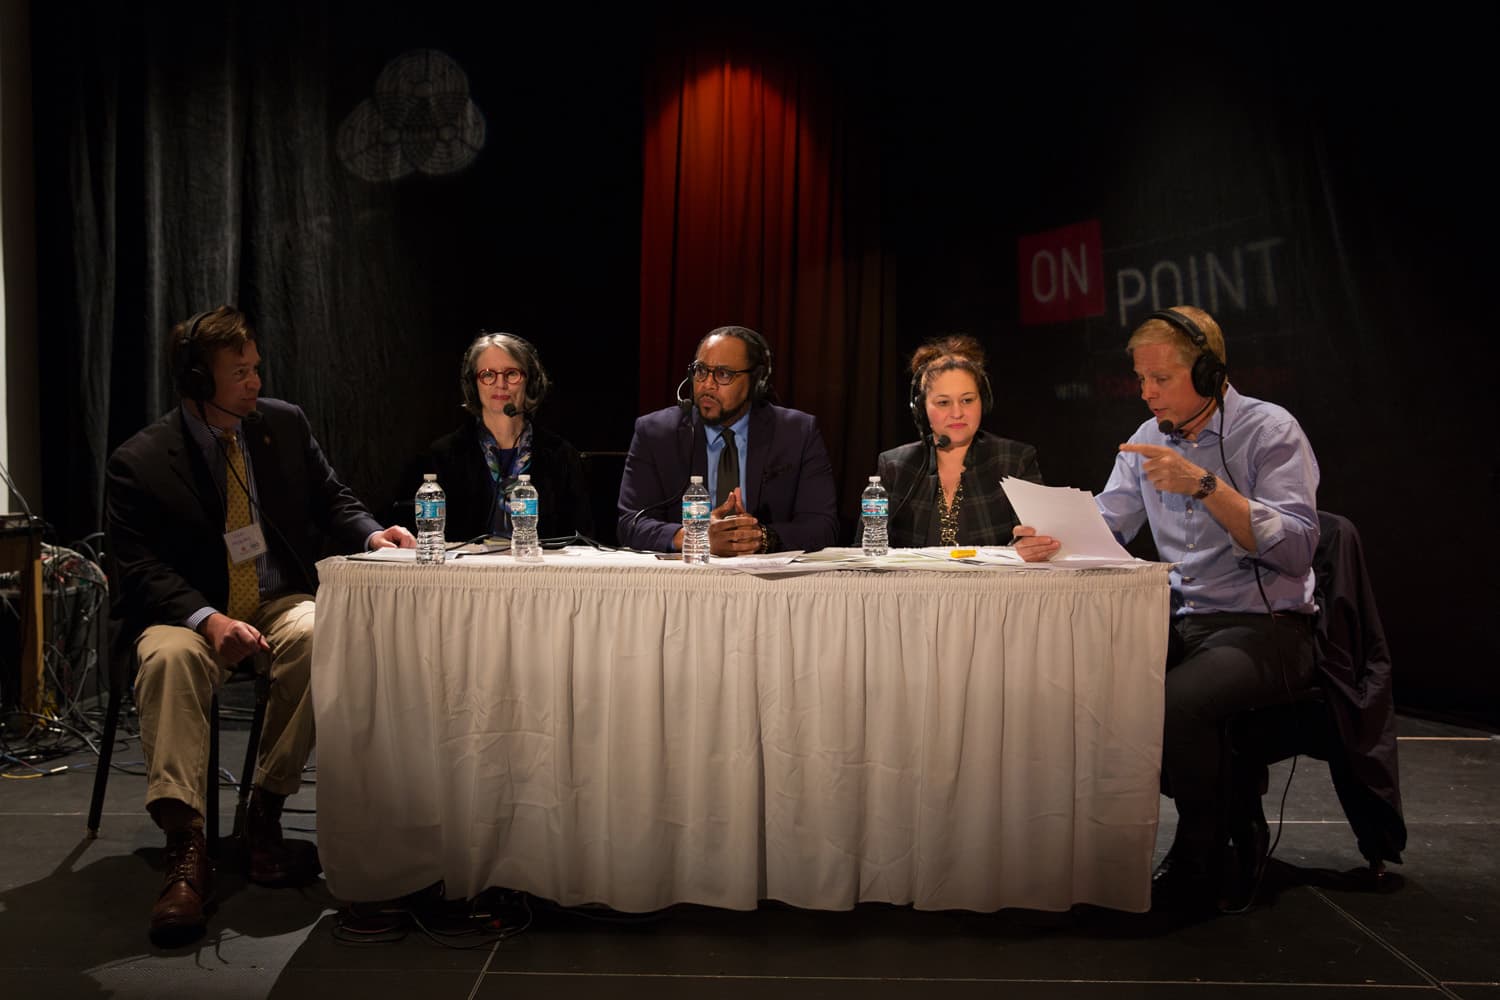 Van Mobley, Martha Barry, James Causey and Toni Rivera-Joachin talk with host Tom Ashbrook at the #OnPointListens event in Milwaukee, WI. (WPR/Tom Krueger, 2017)